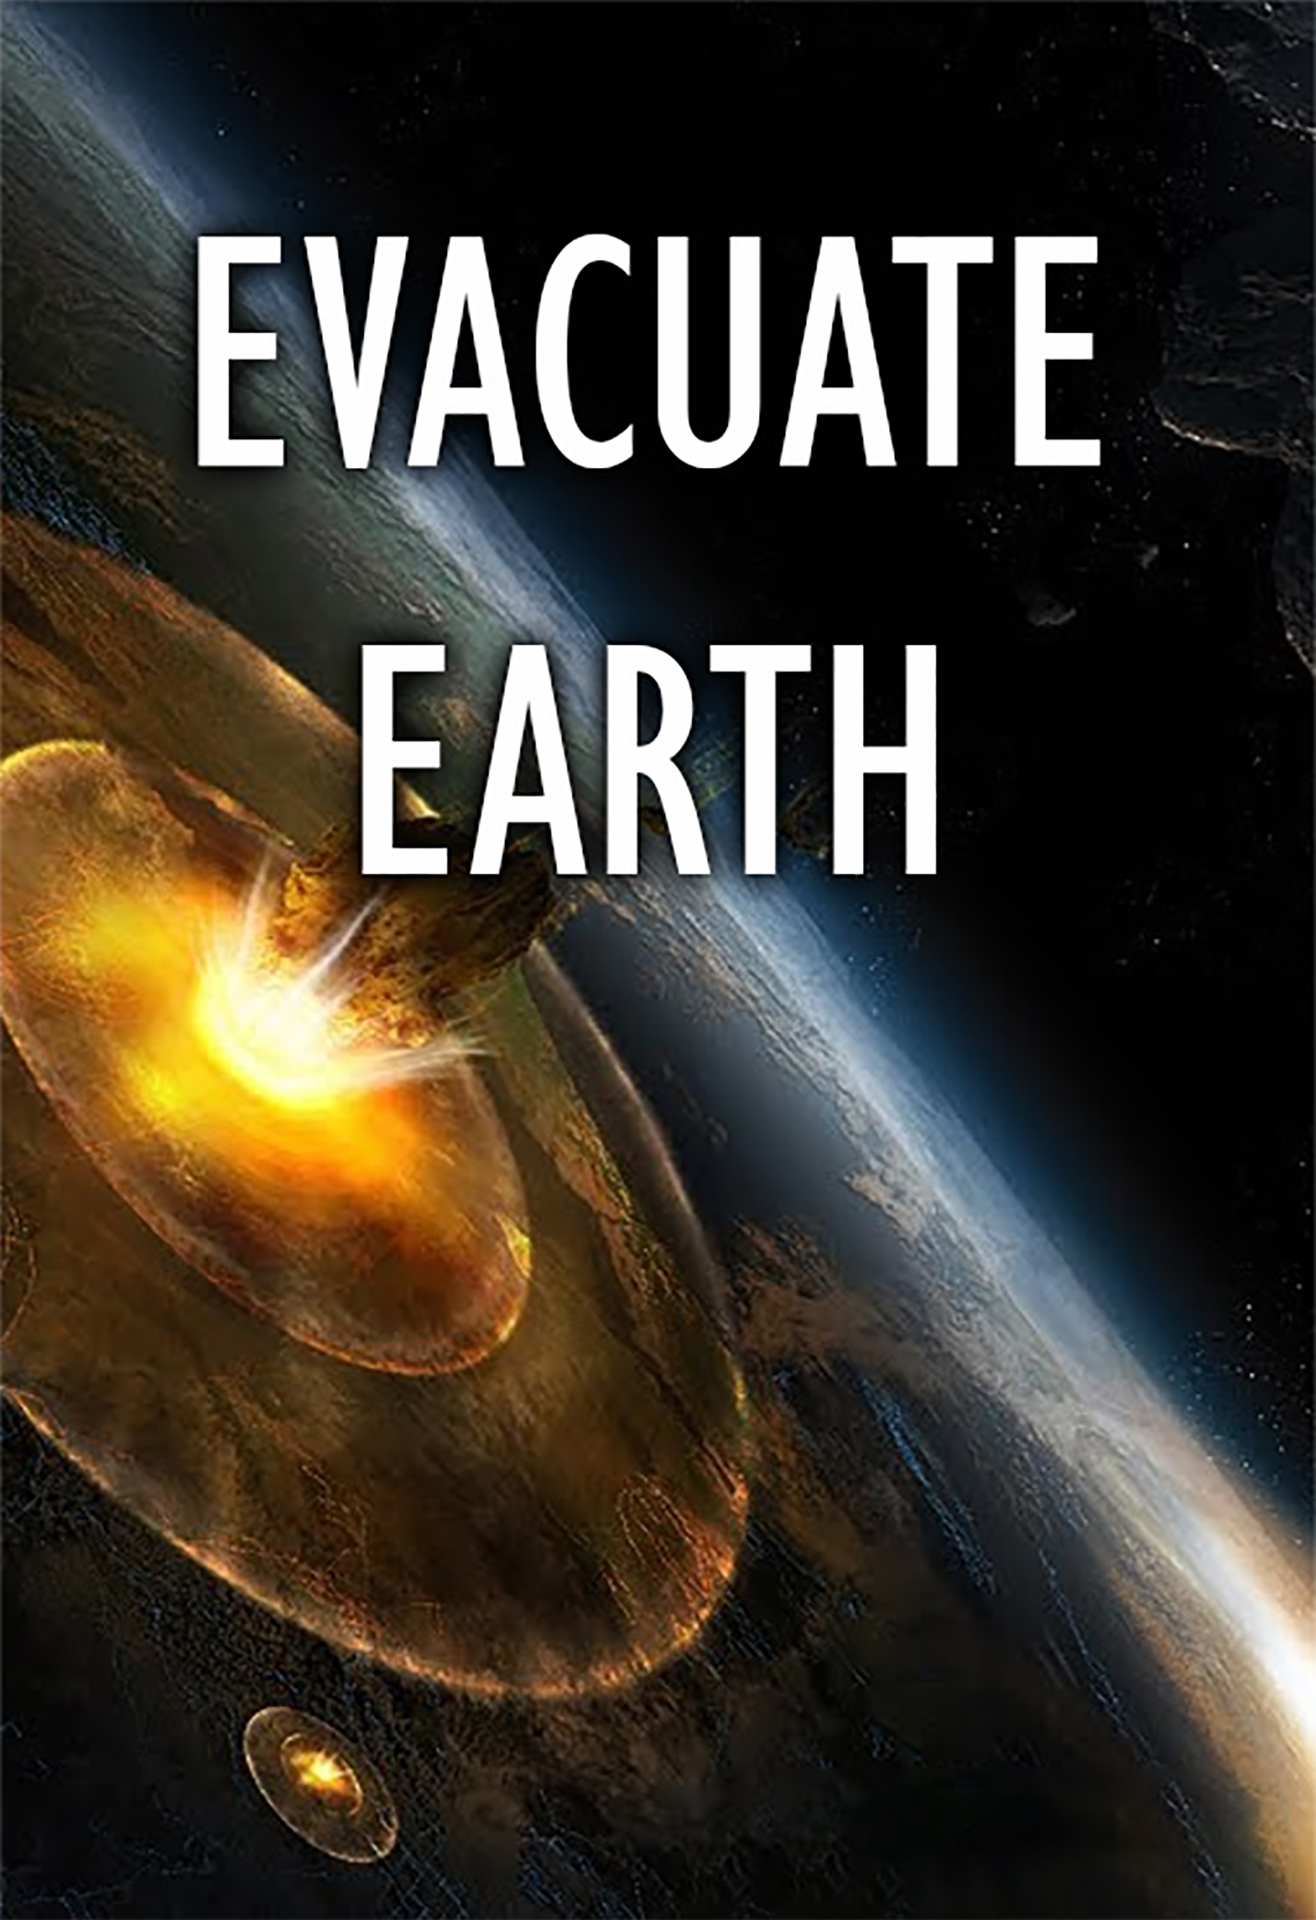 Evacuate Earth TV Listings, TV Schedule and Episode Guide | TV Guide